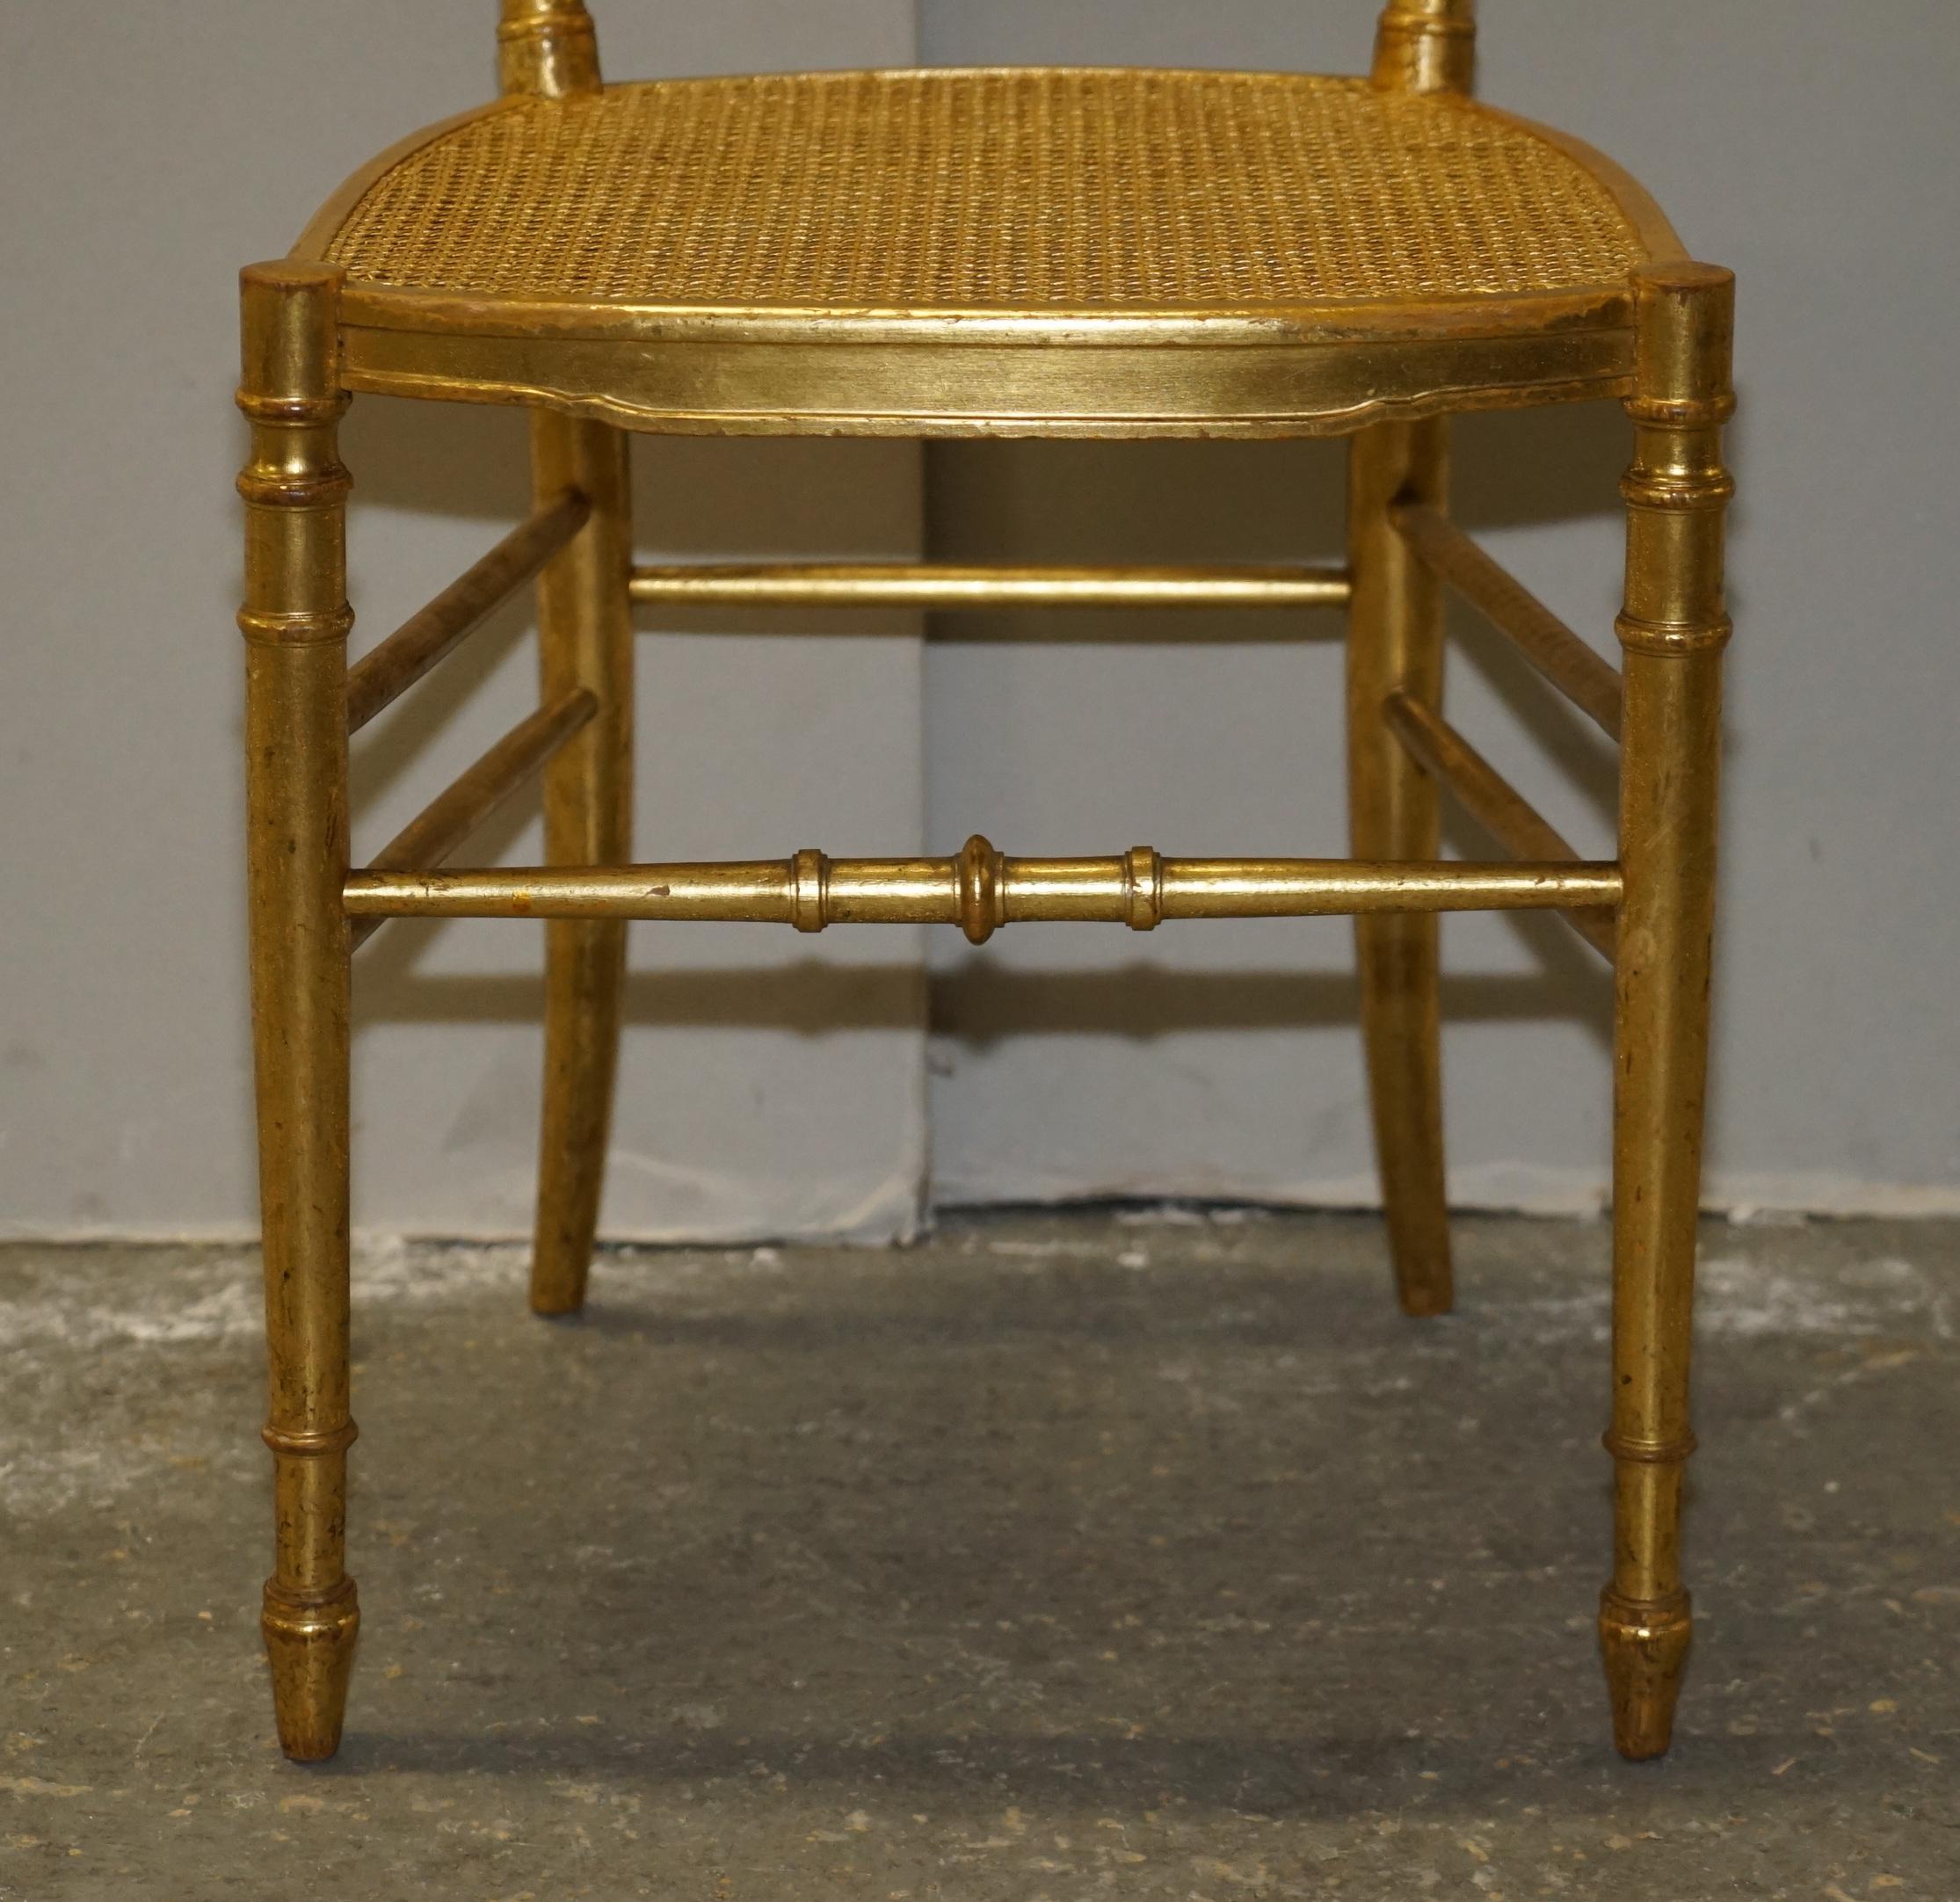 Hand-Crafted 1 of 30 Antique Lady Diana's Family Spencer House Giltwood Bergere Banque Chairs For Sale